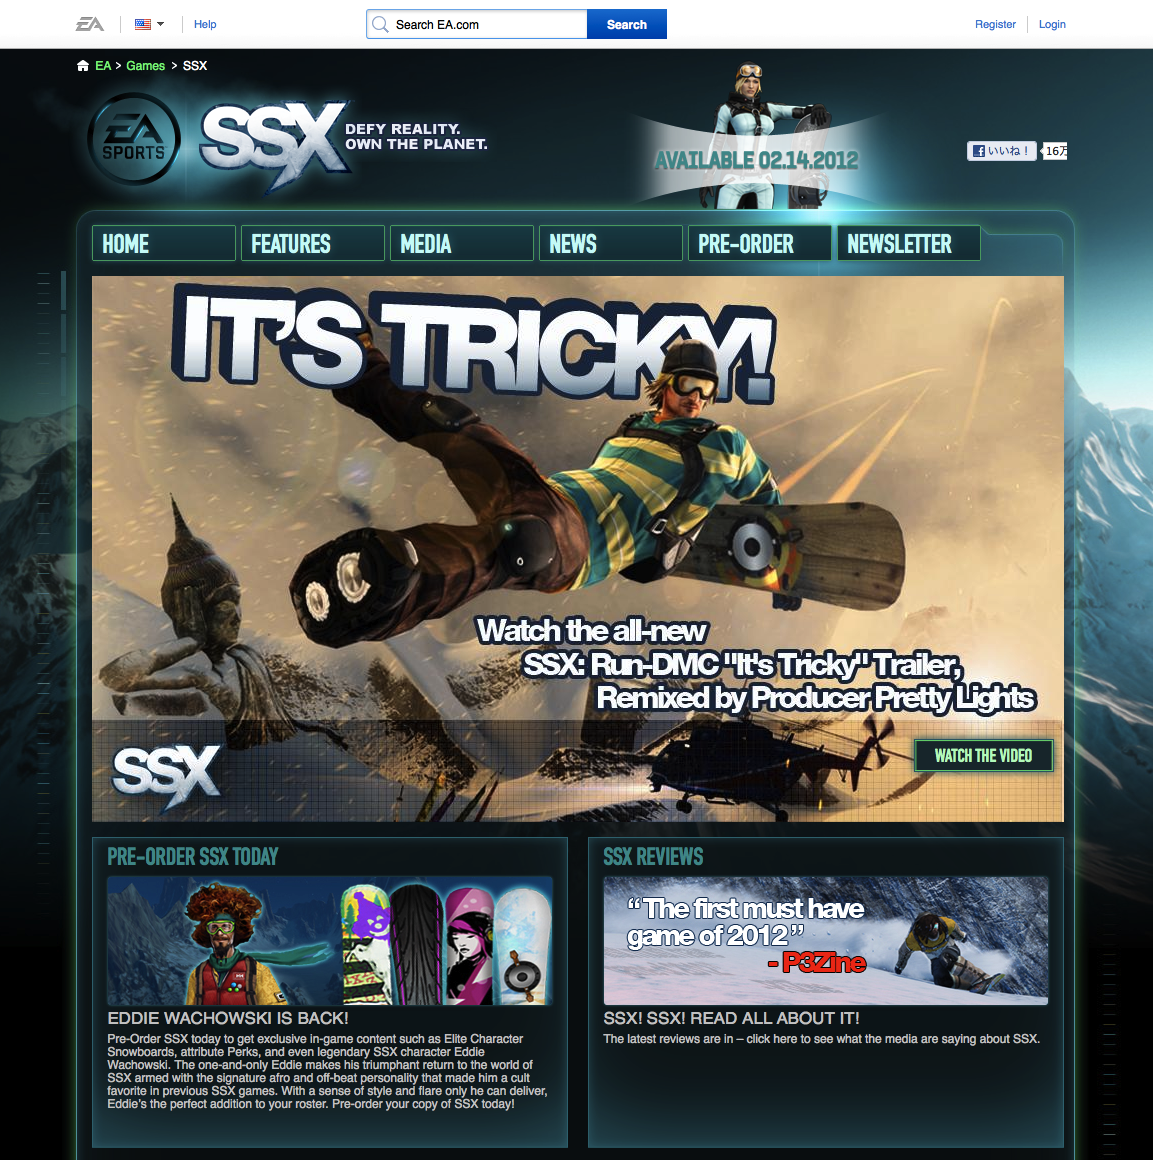 SSX  Snowboarding Video Game  EA SPORTS